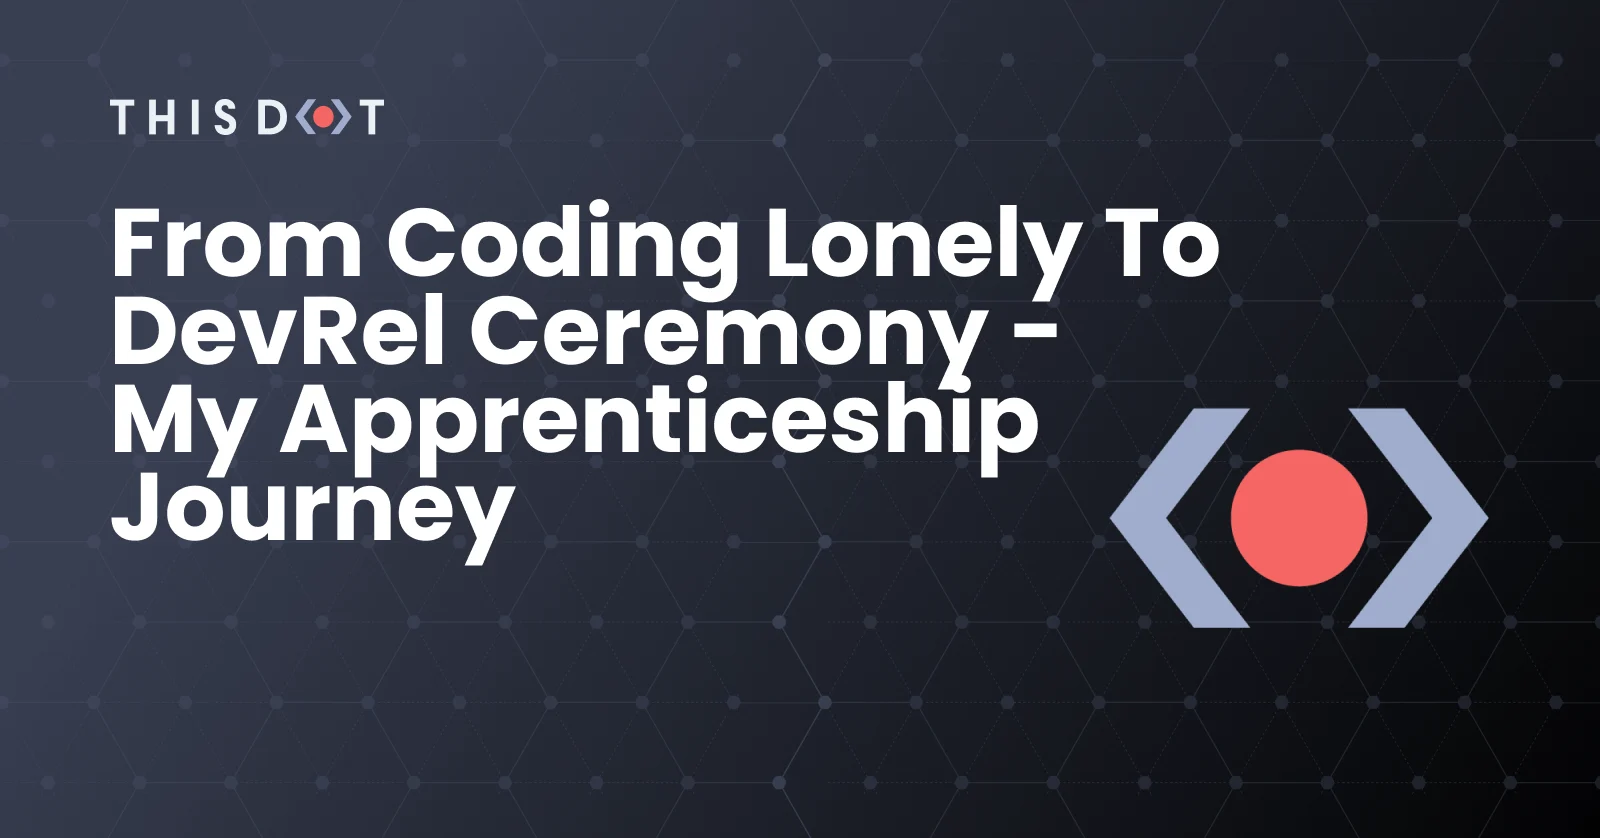 From Coding Lonely to DevRel Ceremony - My Apprenticeship Journey cover image